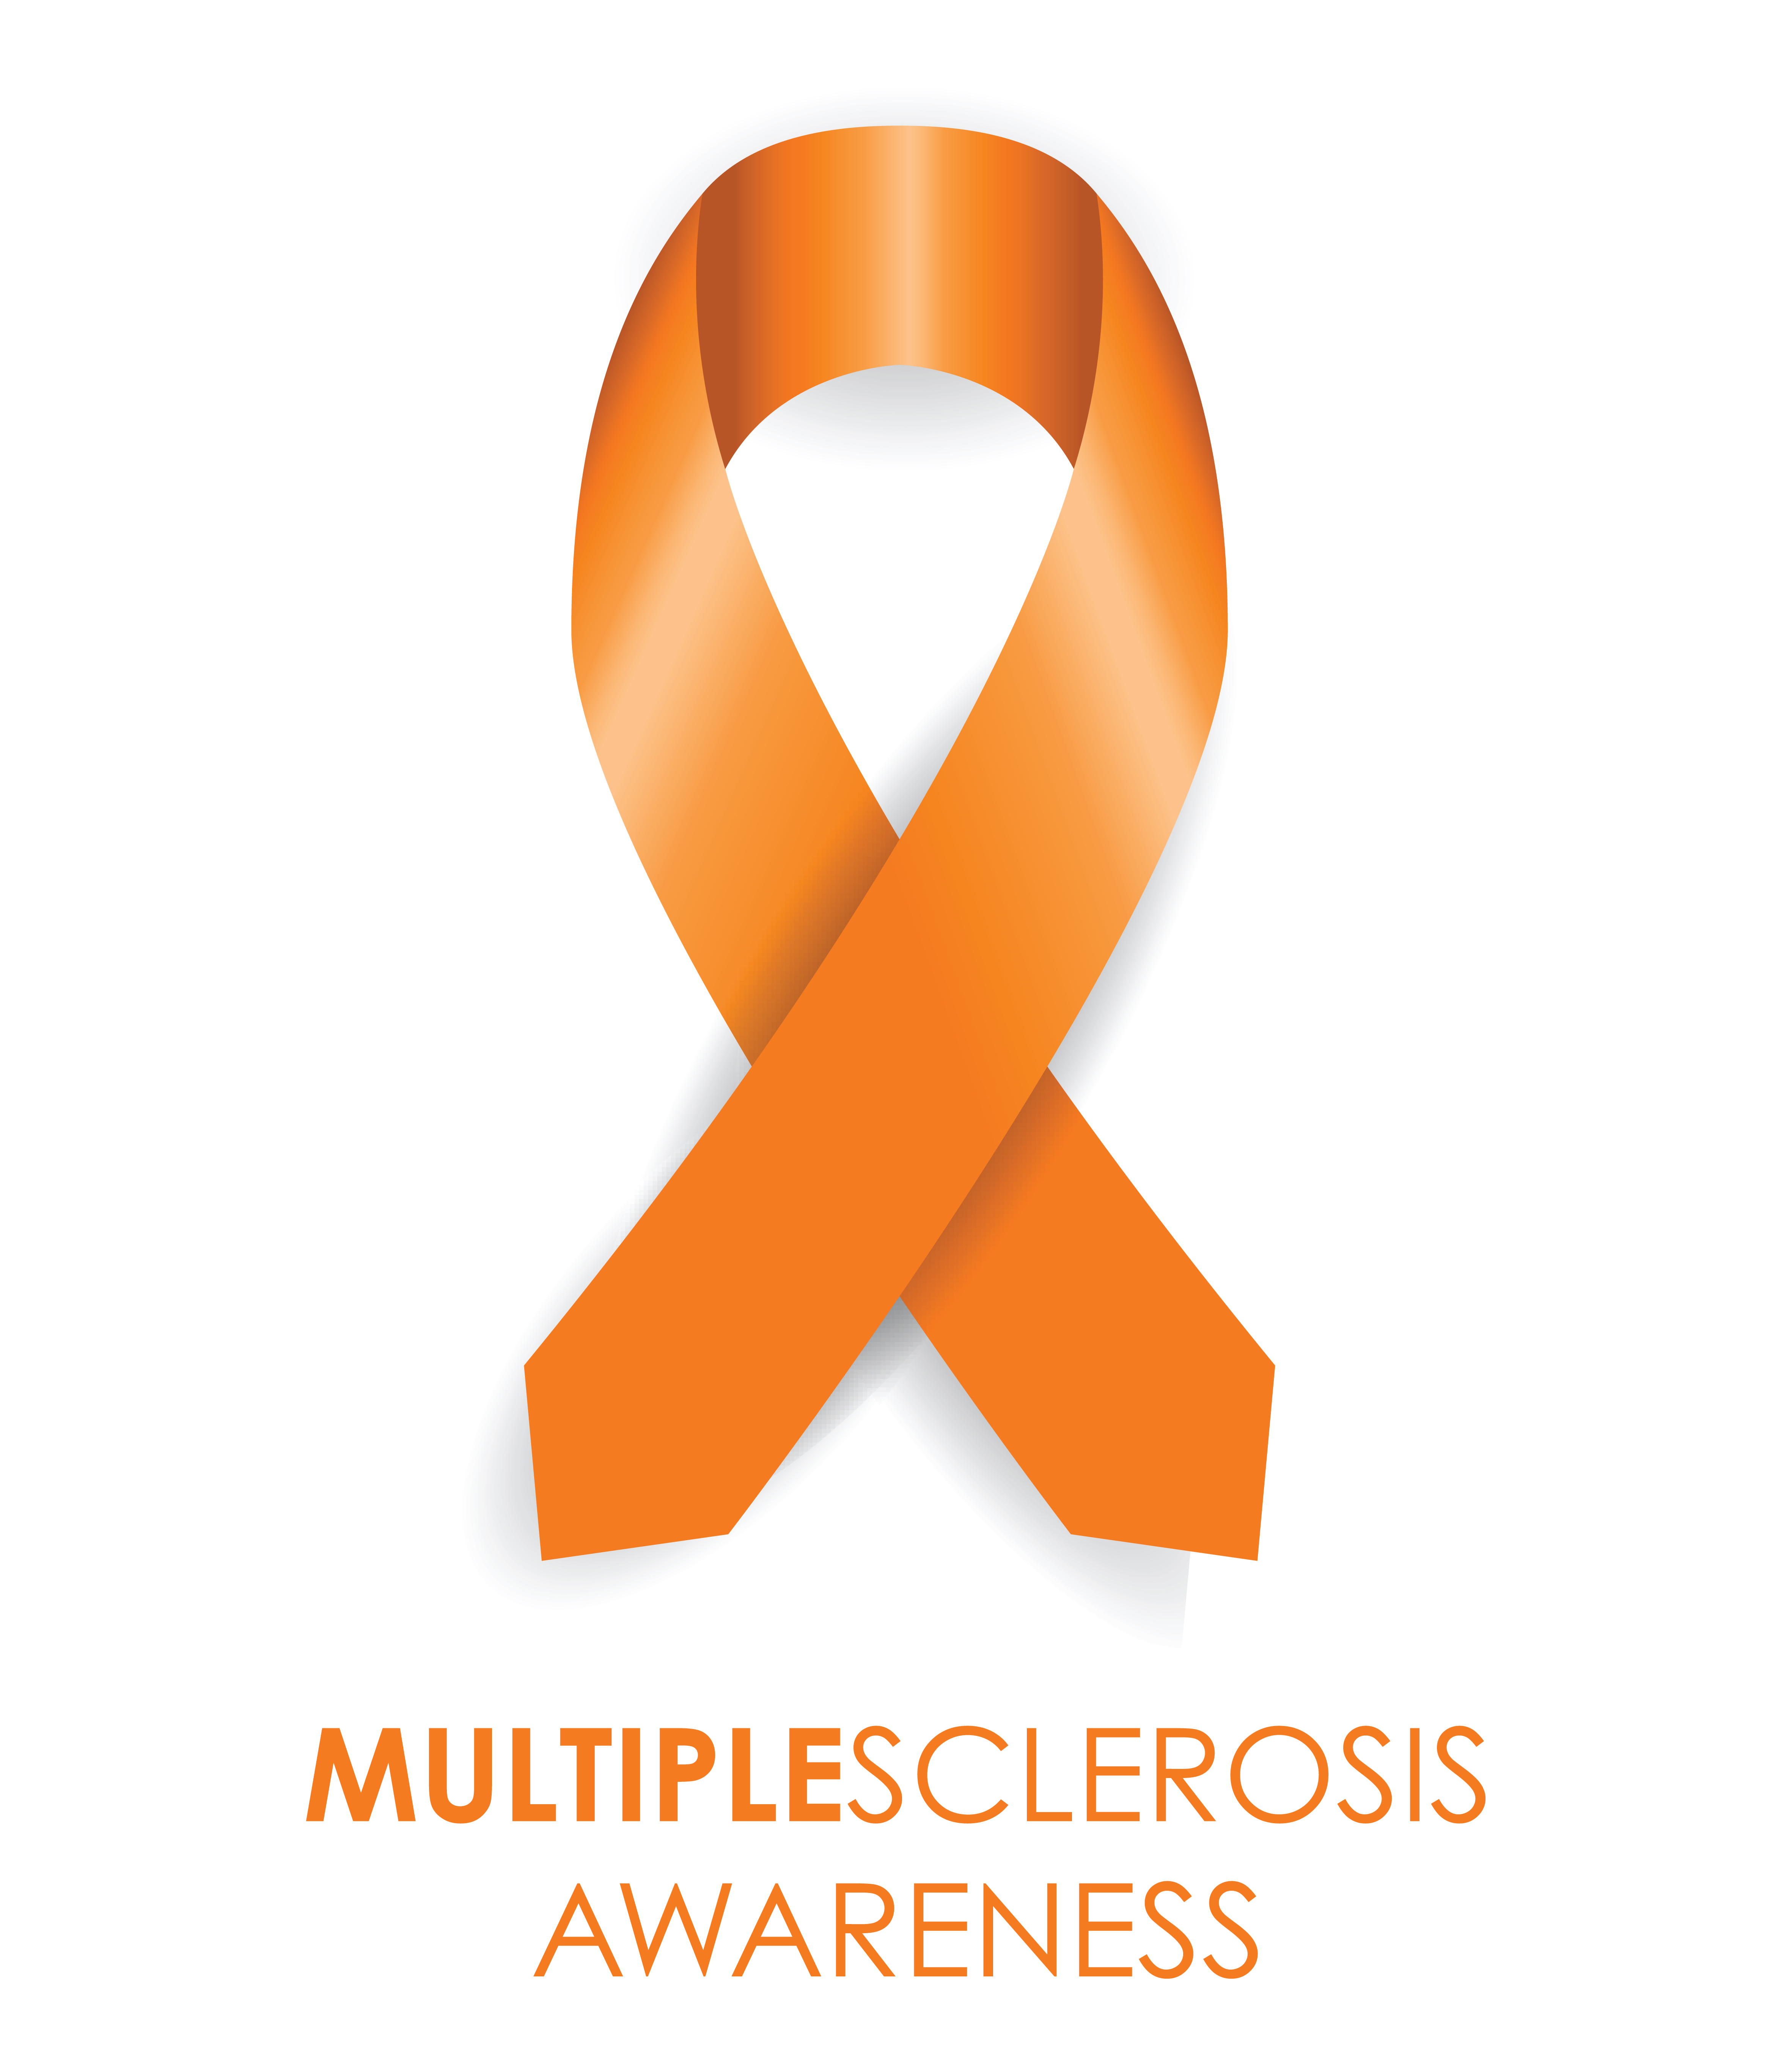 A Guide for the Multiple Sclerosis Patient: Key Things to Know About MS